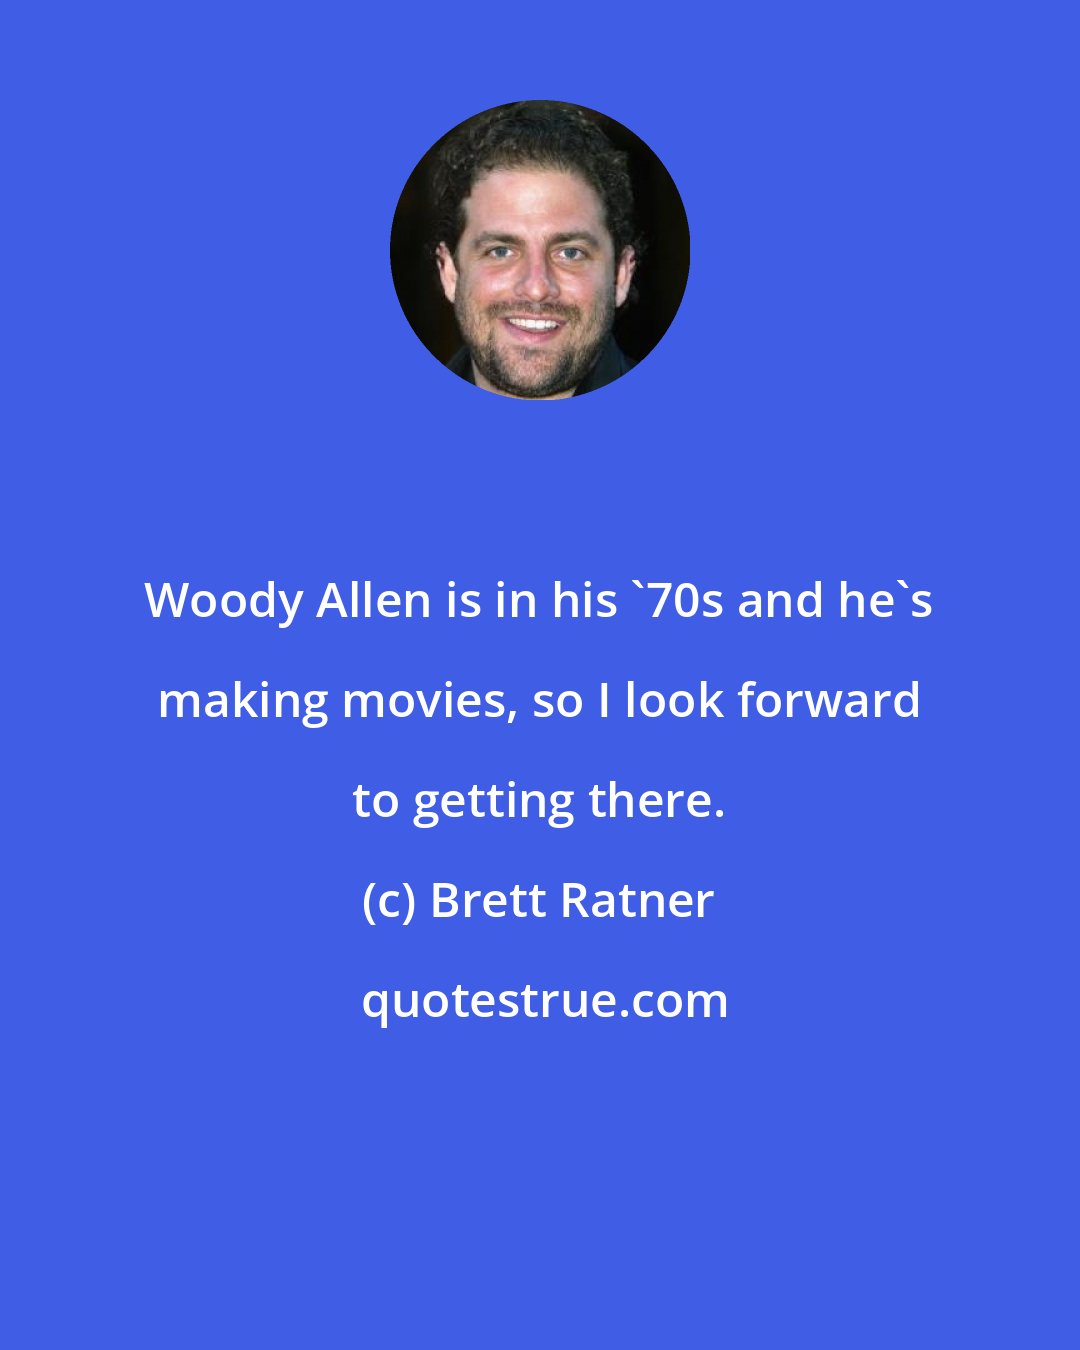 Brett Ratner: Woody Allen is in his '70s and he's making movies, so I look forward to getting there.